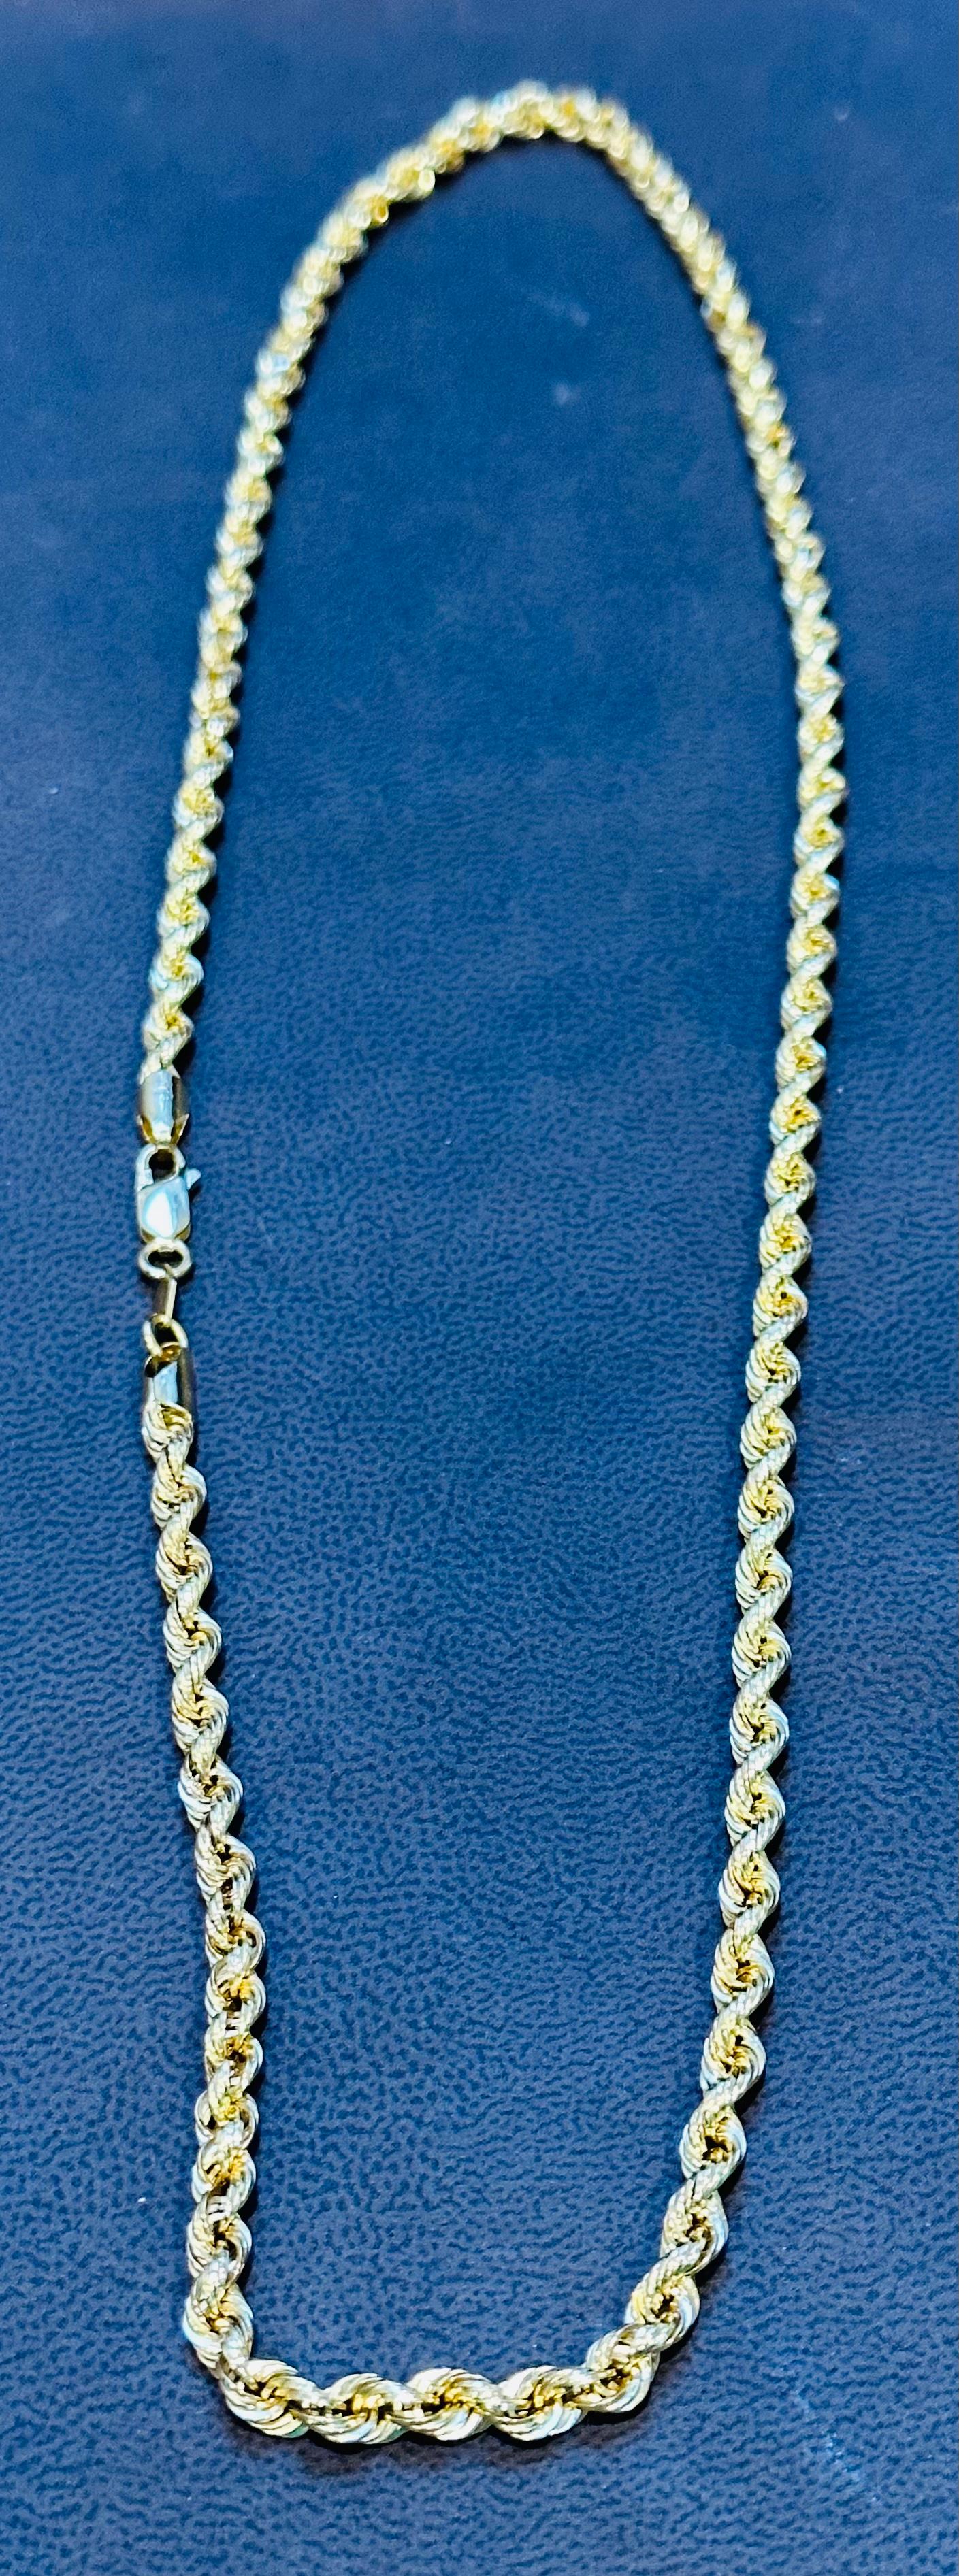 Vintage 14 Karat Yellow Gold 8.3 Gm, Rope Chain Necklace For Sale 6